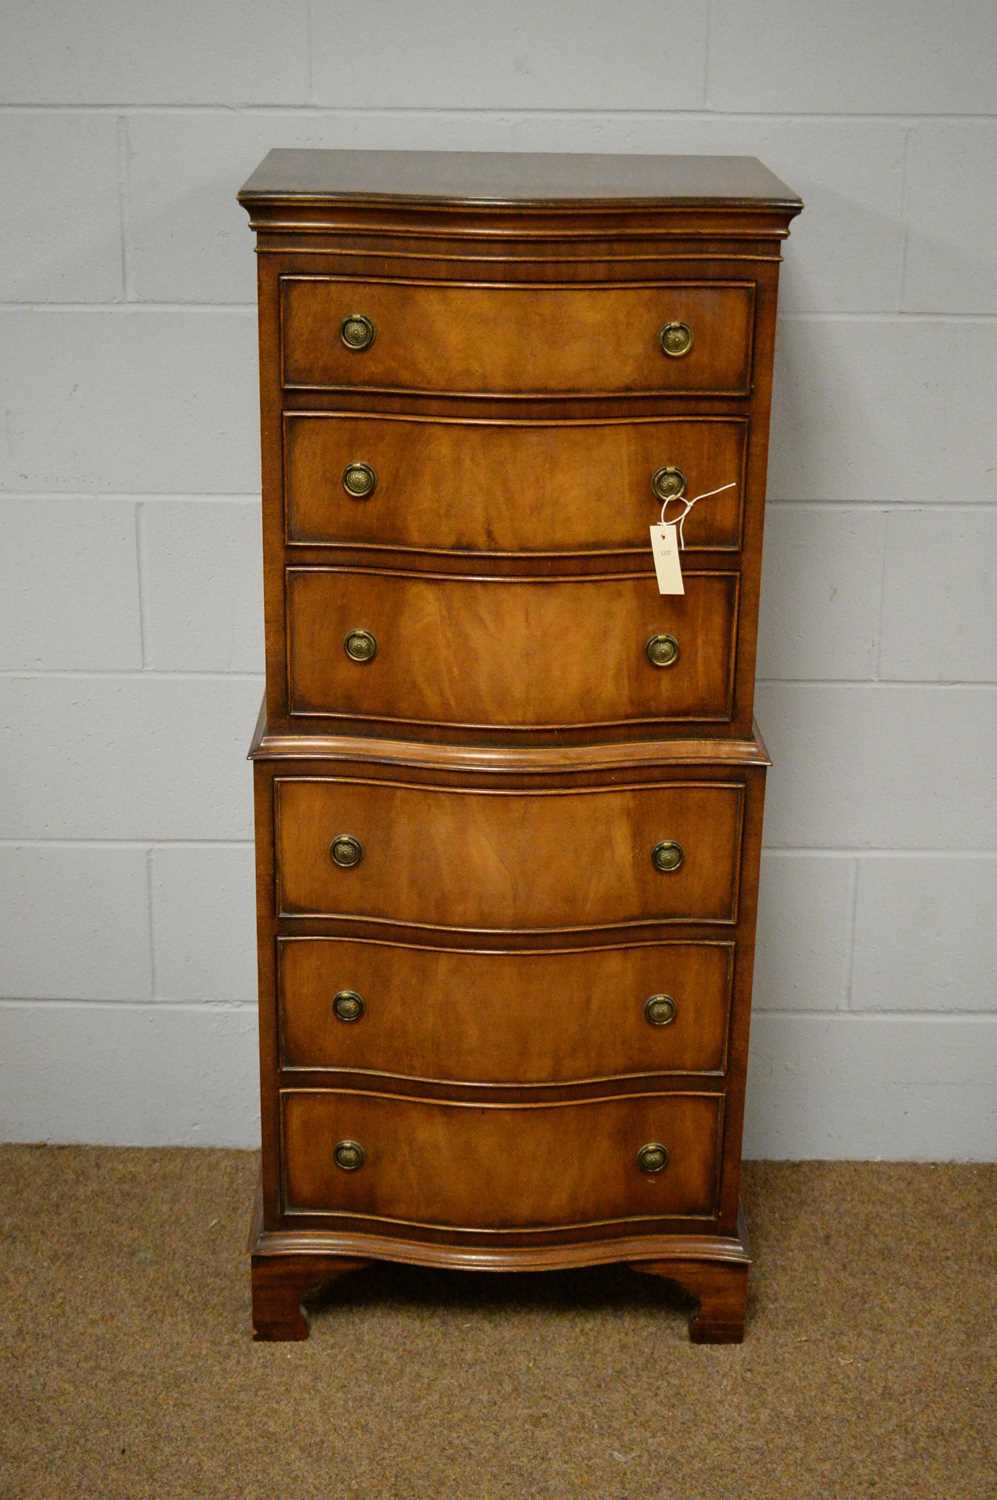 A reproduction Georgian-style chest-on-chest